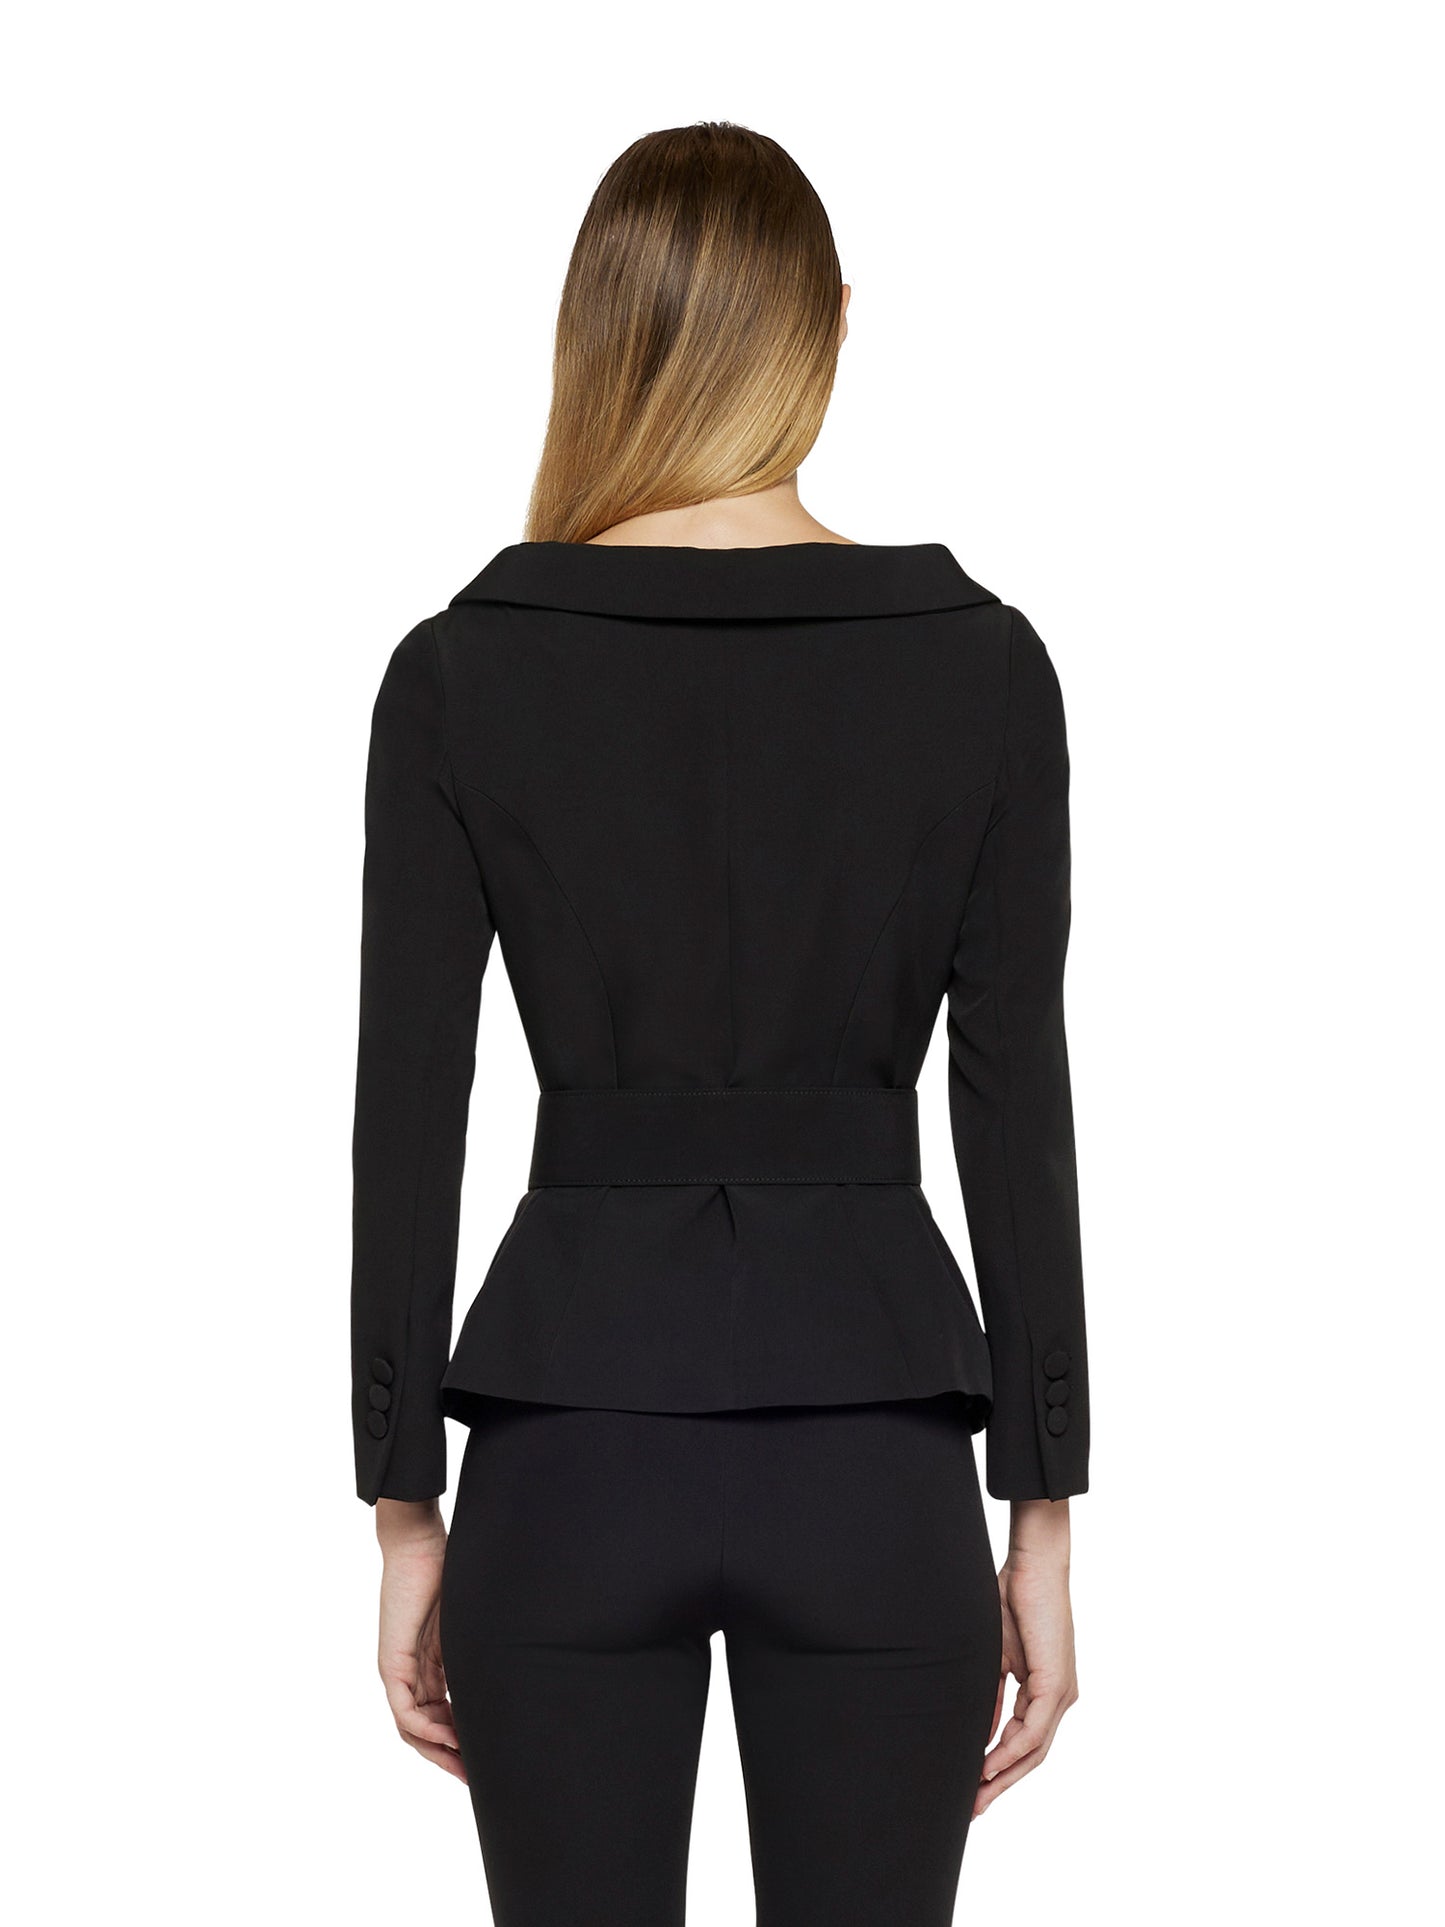 Ultra-feminine jacket in technical fabric with over buckle